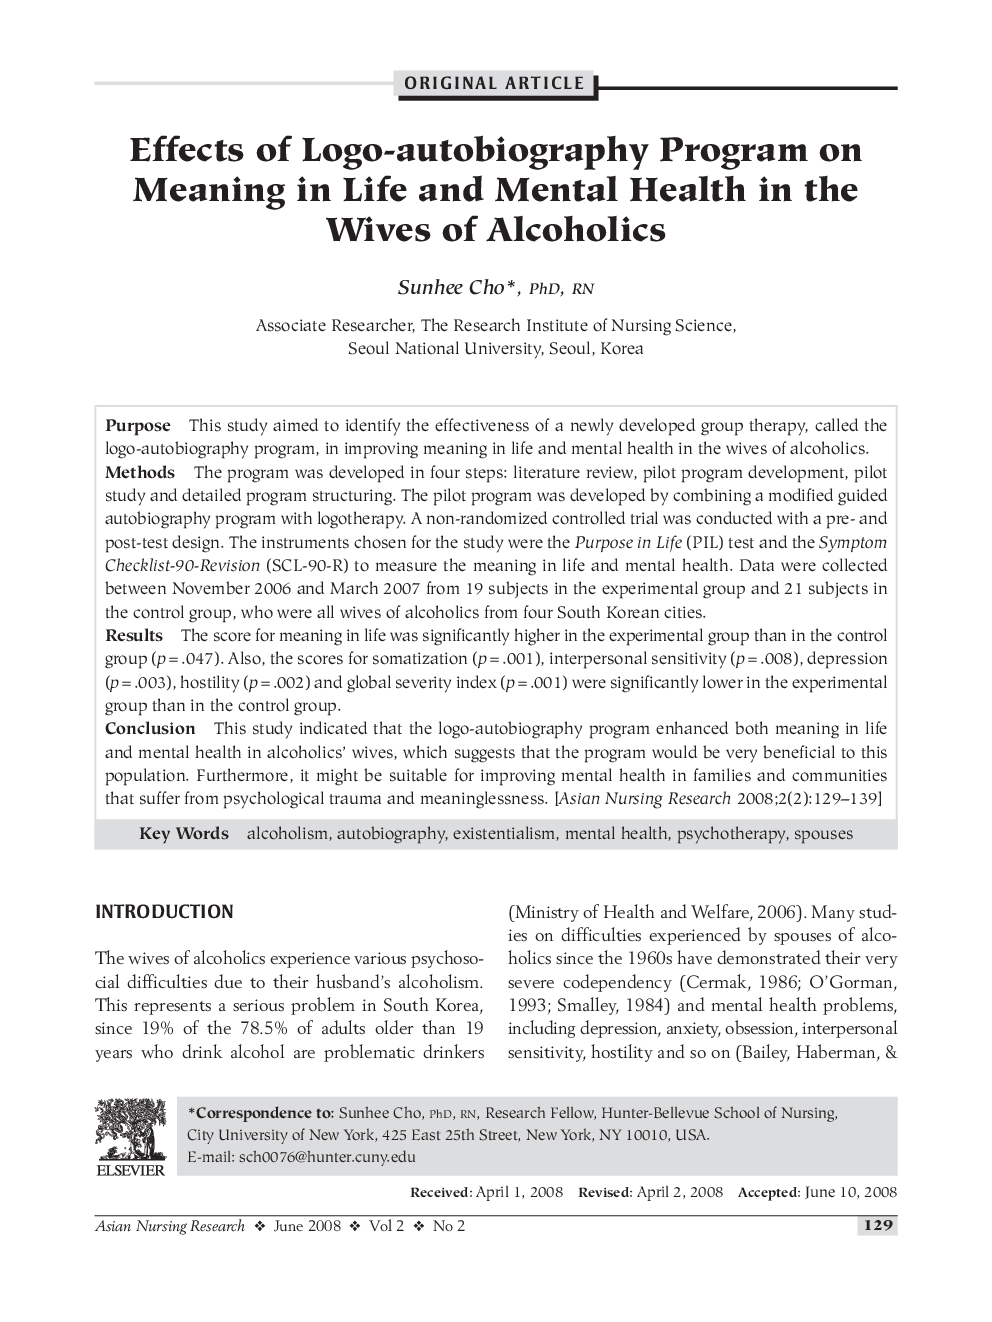 Effects of Logo-autobiography Program on Meaning in Life and Mental Health in the Wives of Alcoholics